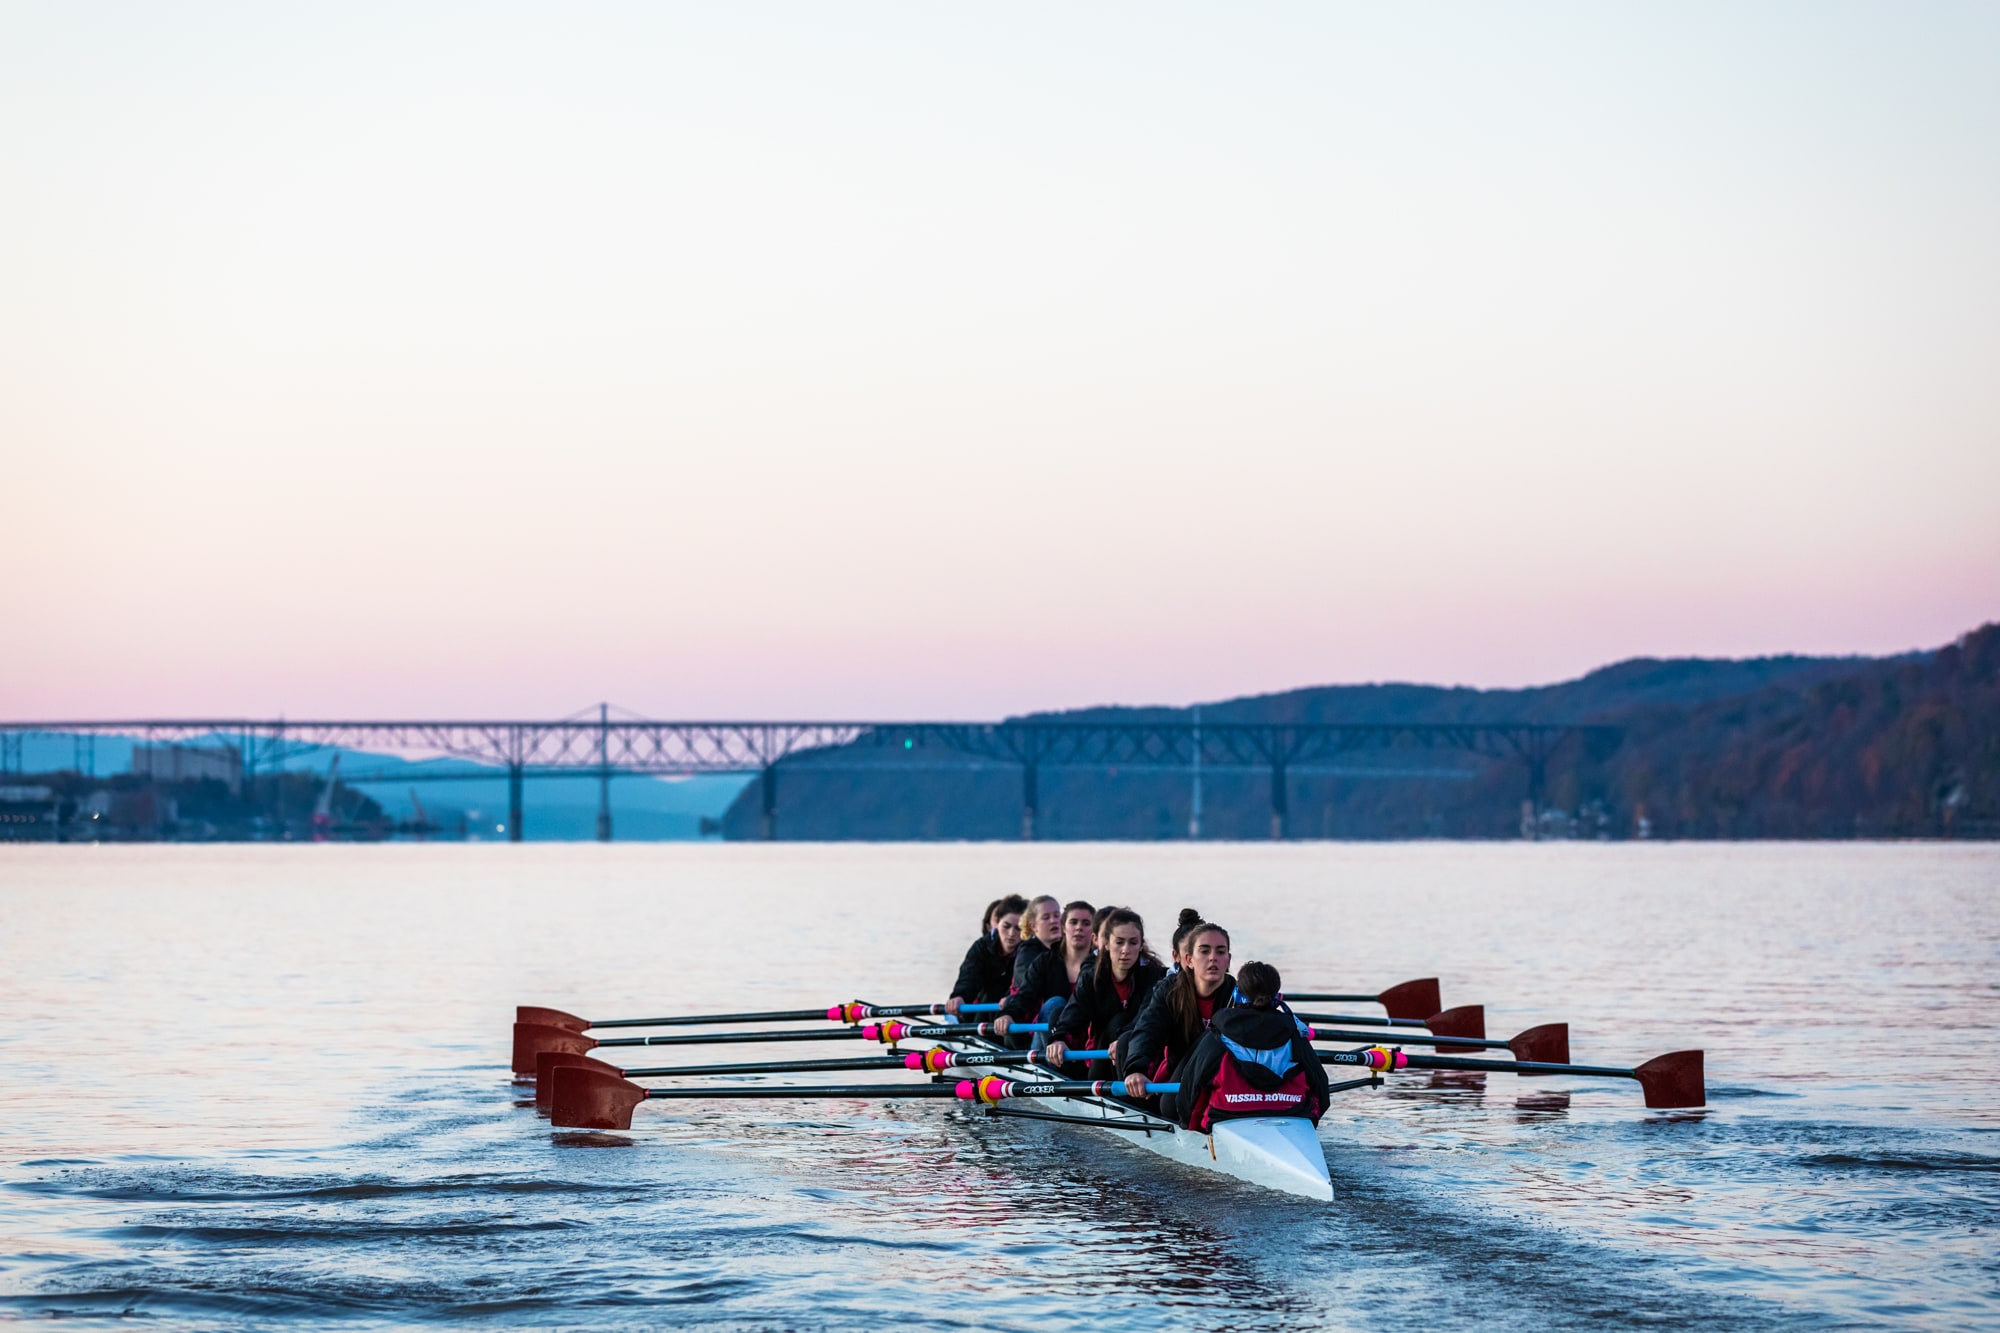 A group of students row on the Hudson River early in the morning